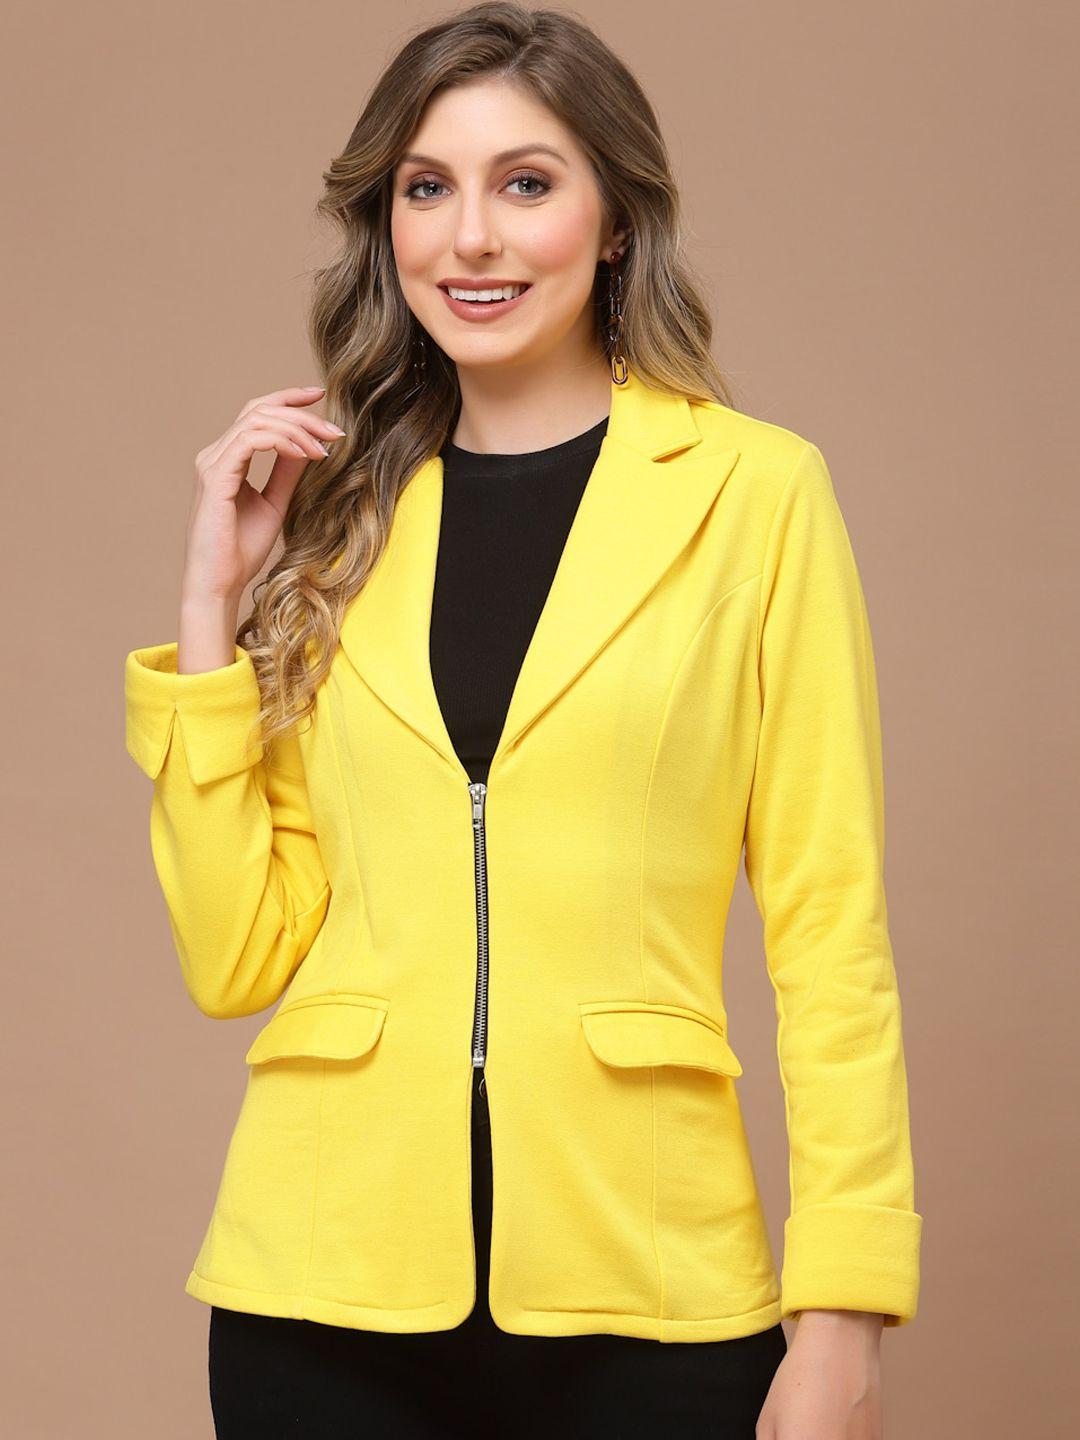 kassually women double-breasted casual blazers